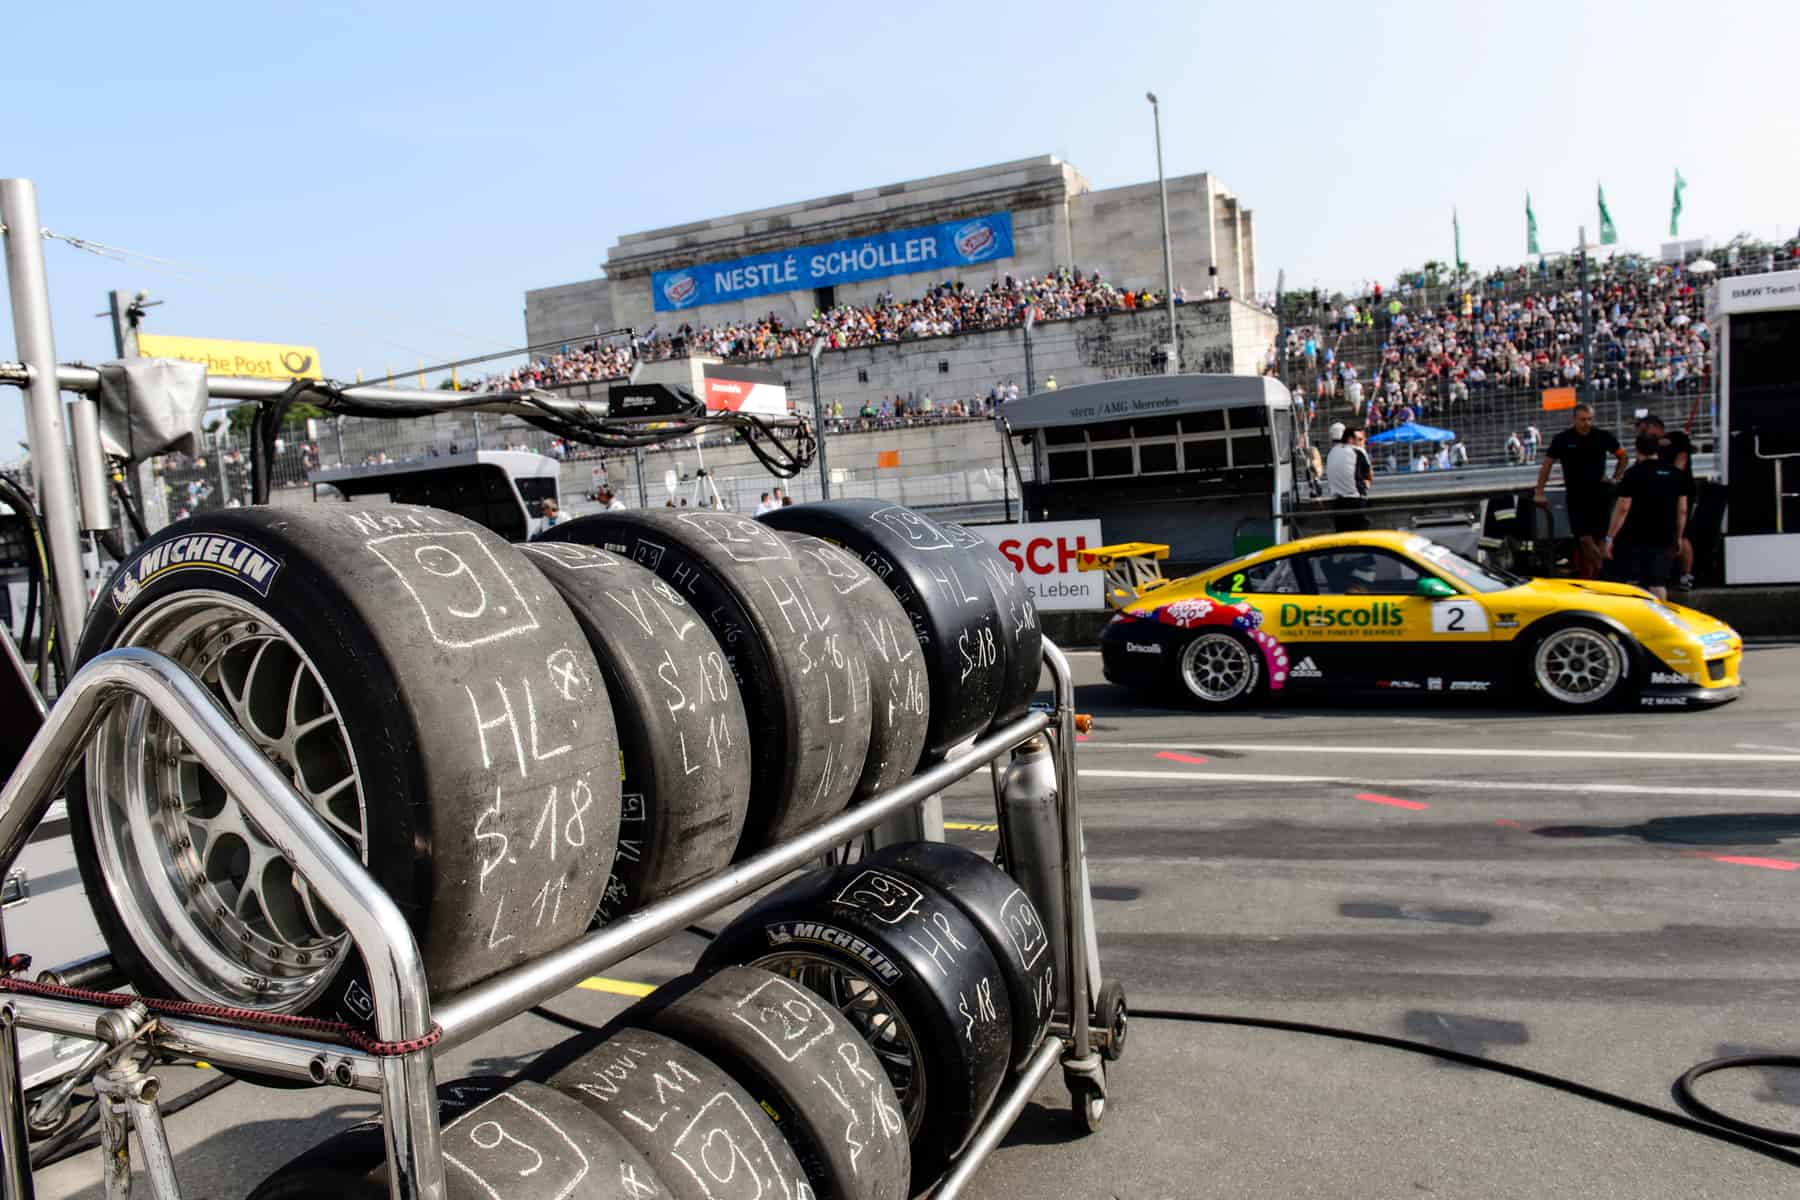 Car tyres stacked in front of the racing track of the Norisring racing event in Nuremberg that takes place on the Nazi Rally Grounds Zeppelin Field